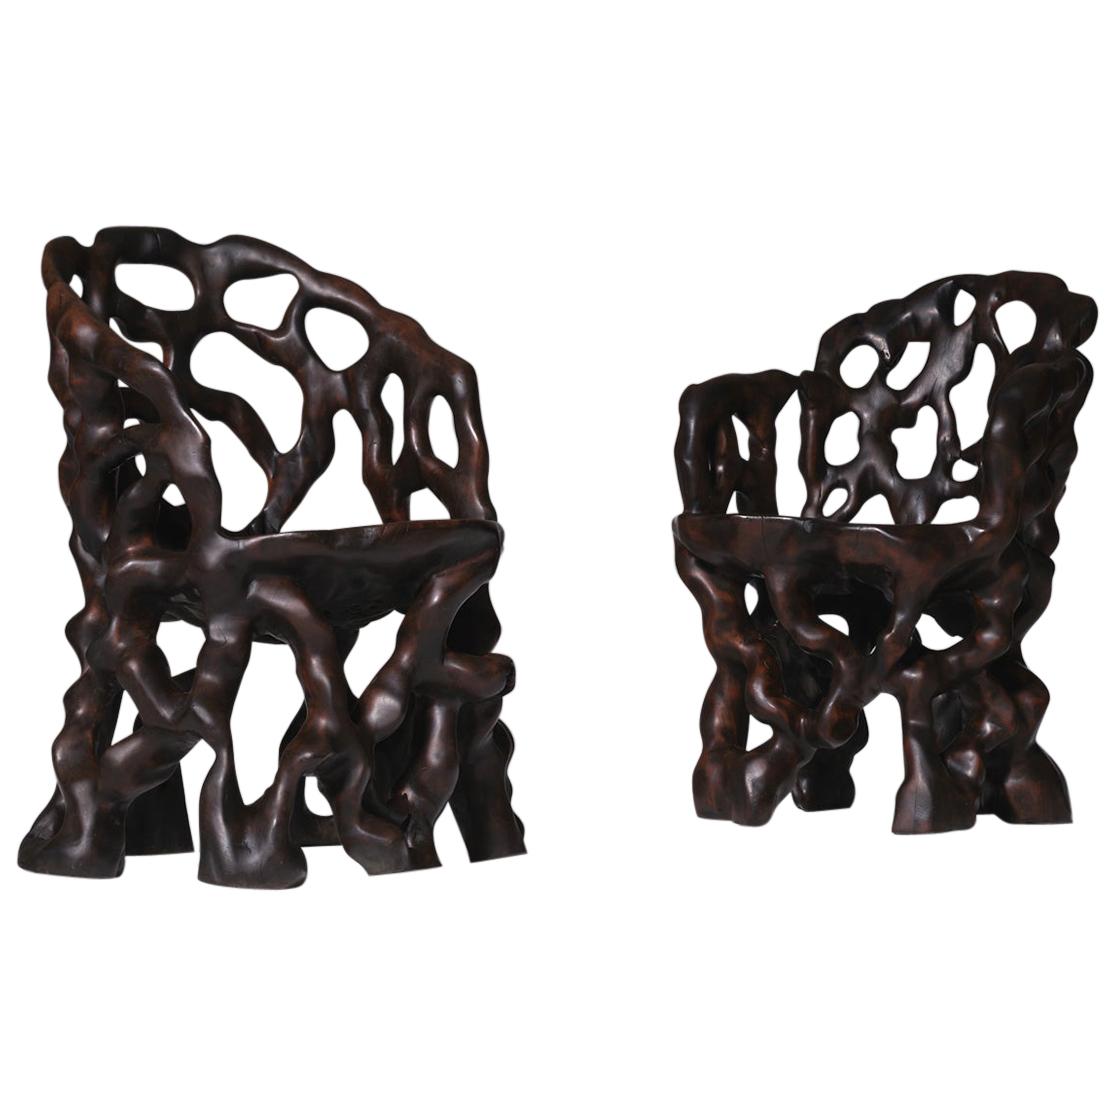 Sculptural Carved Wooden ‘Root’ Chairs